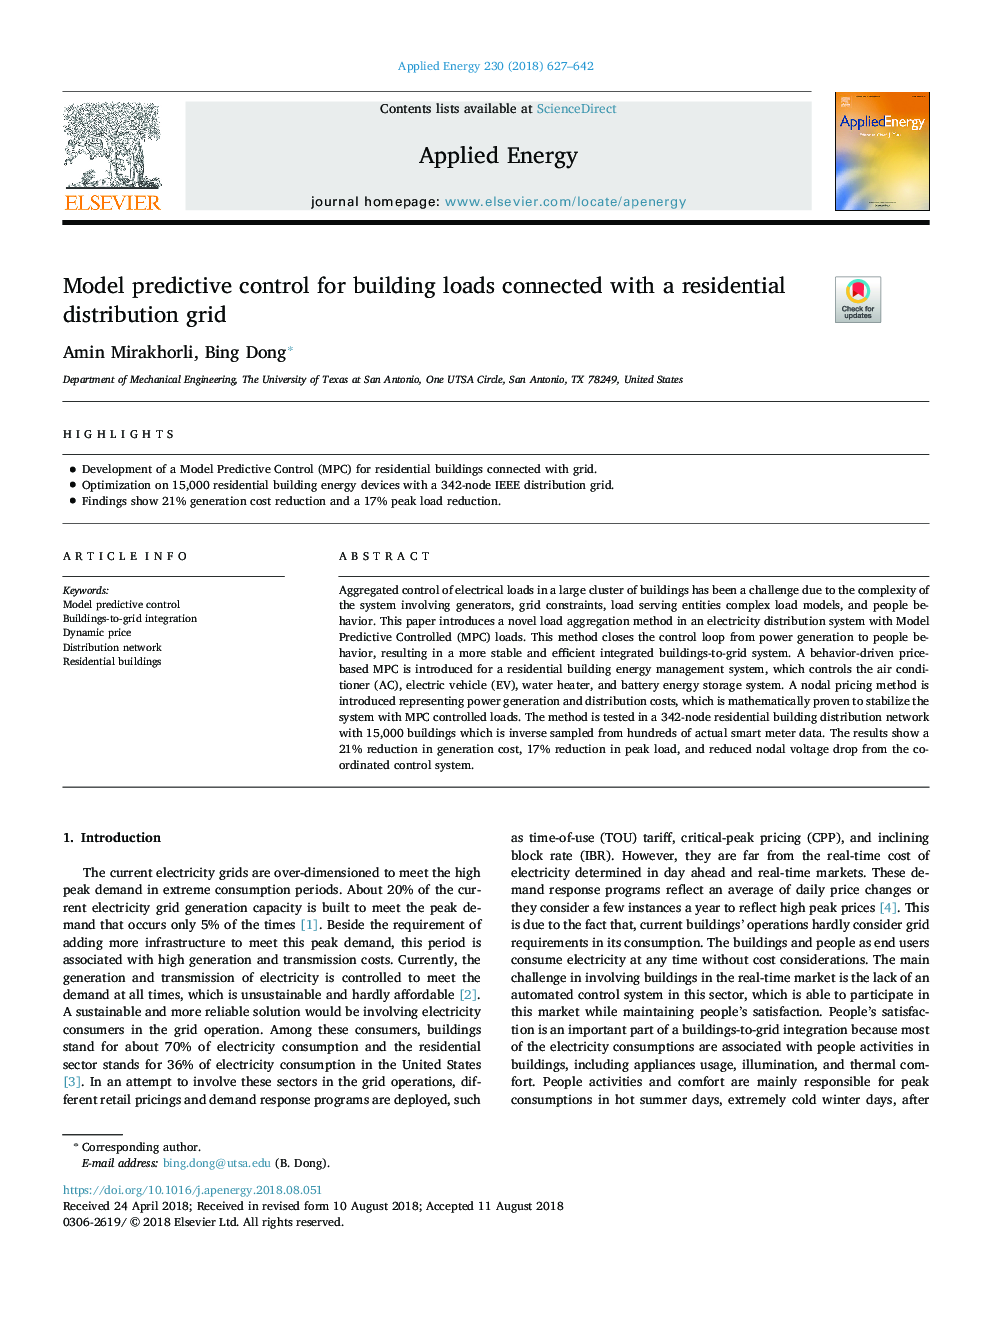 Model predictive control for building loads connected with a residential distribution grid